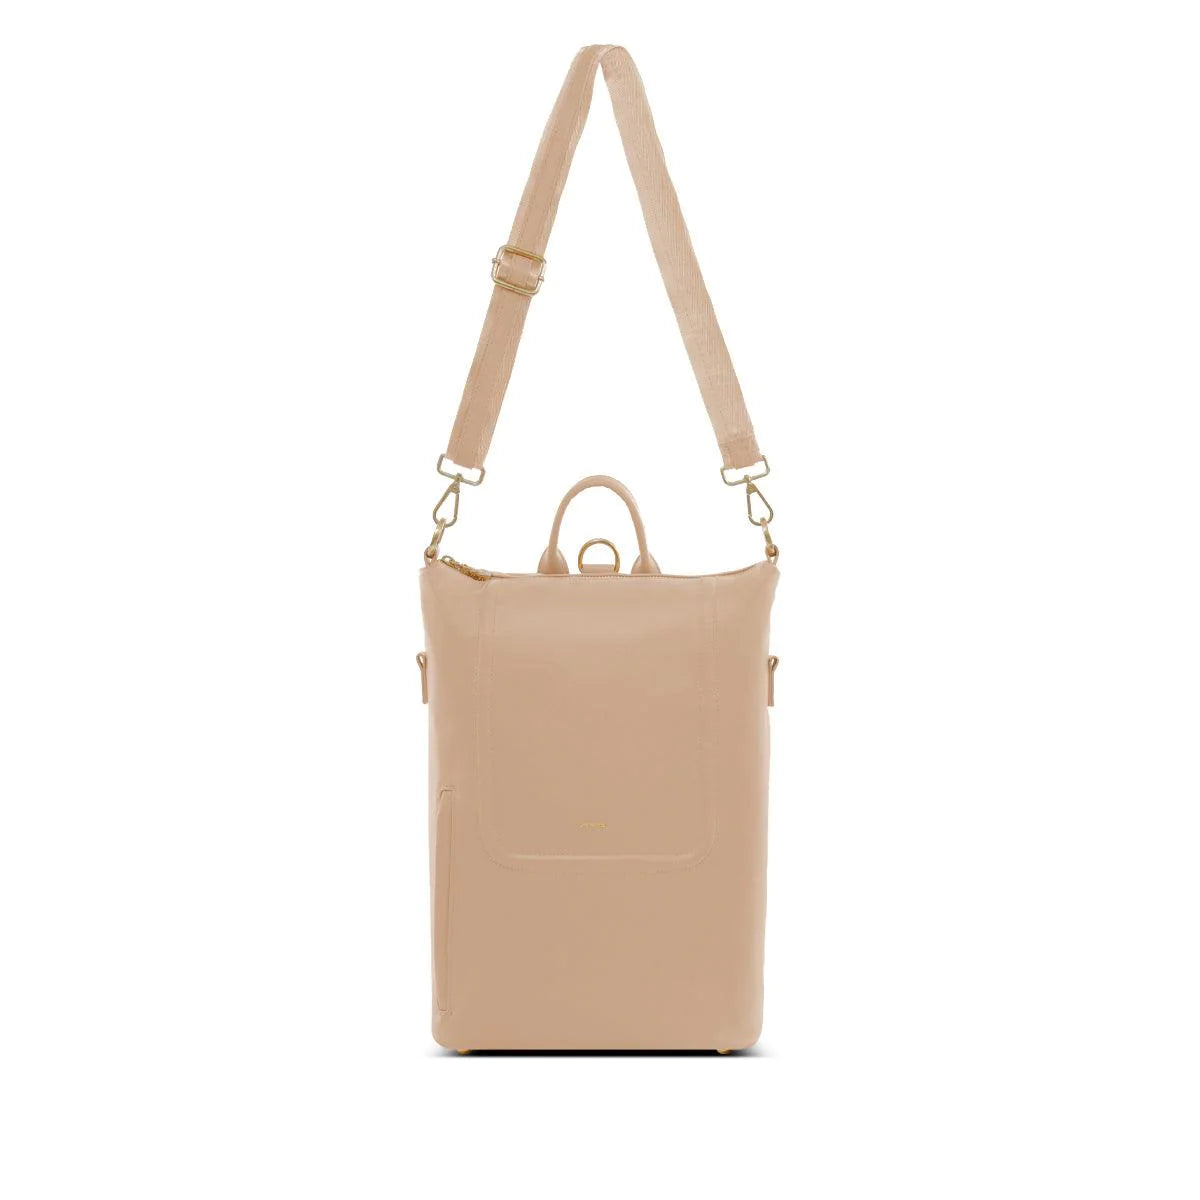 Blossom Backpack Small - Sand